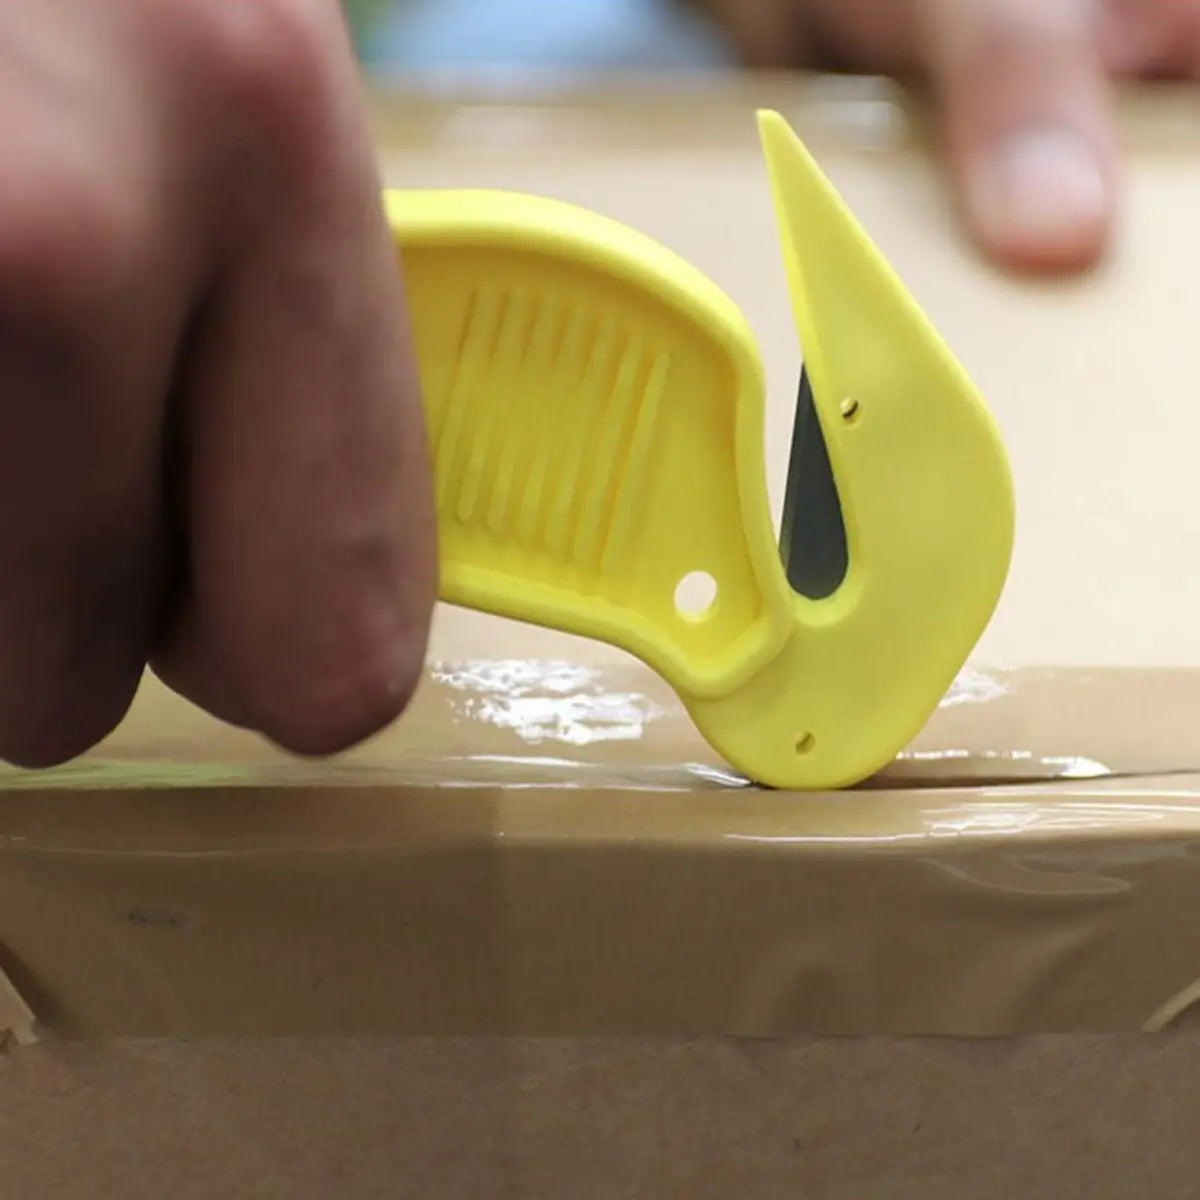 Disposable Safety Knife – Box Cutter with built in Tape cutter